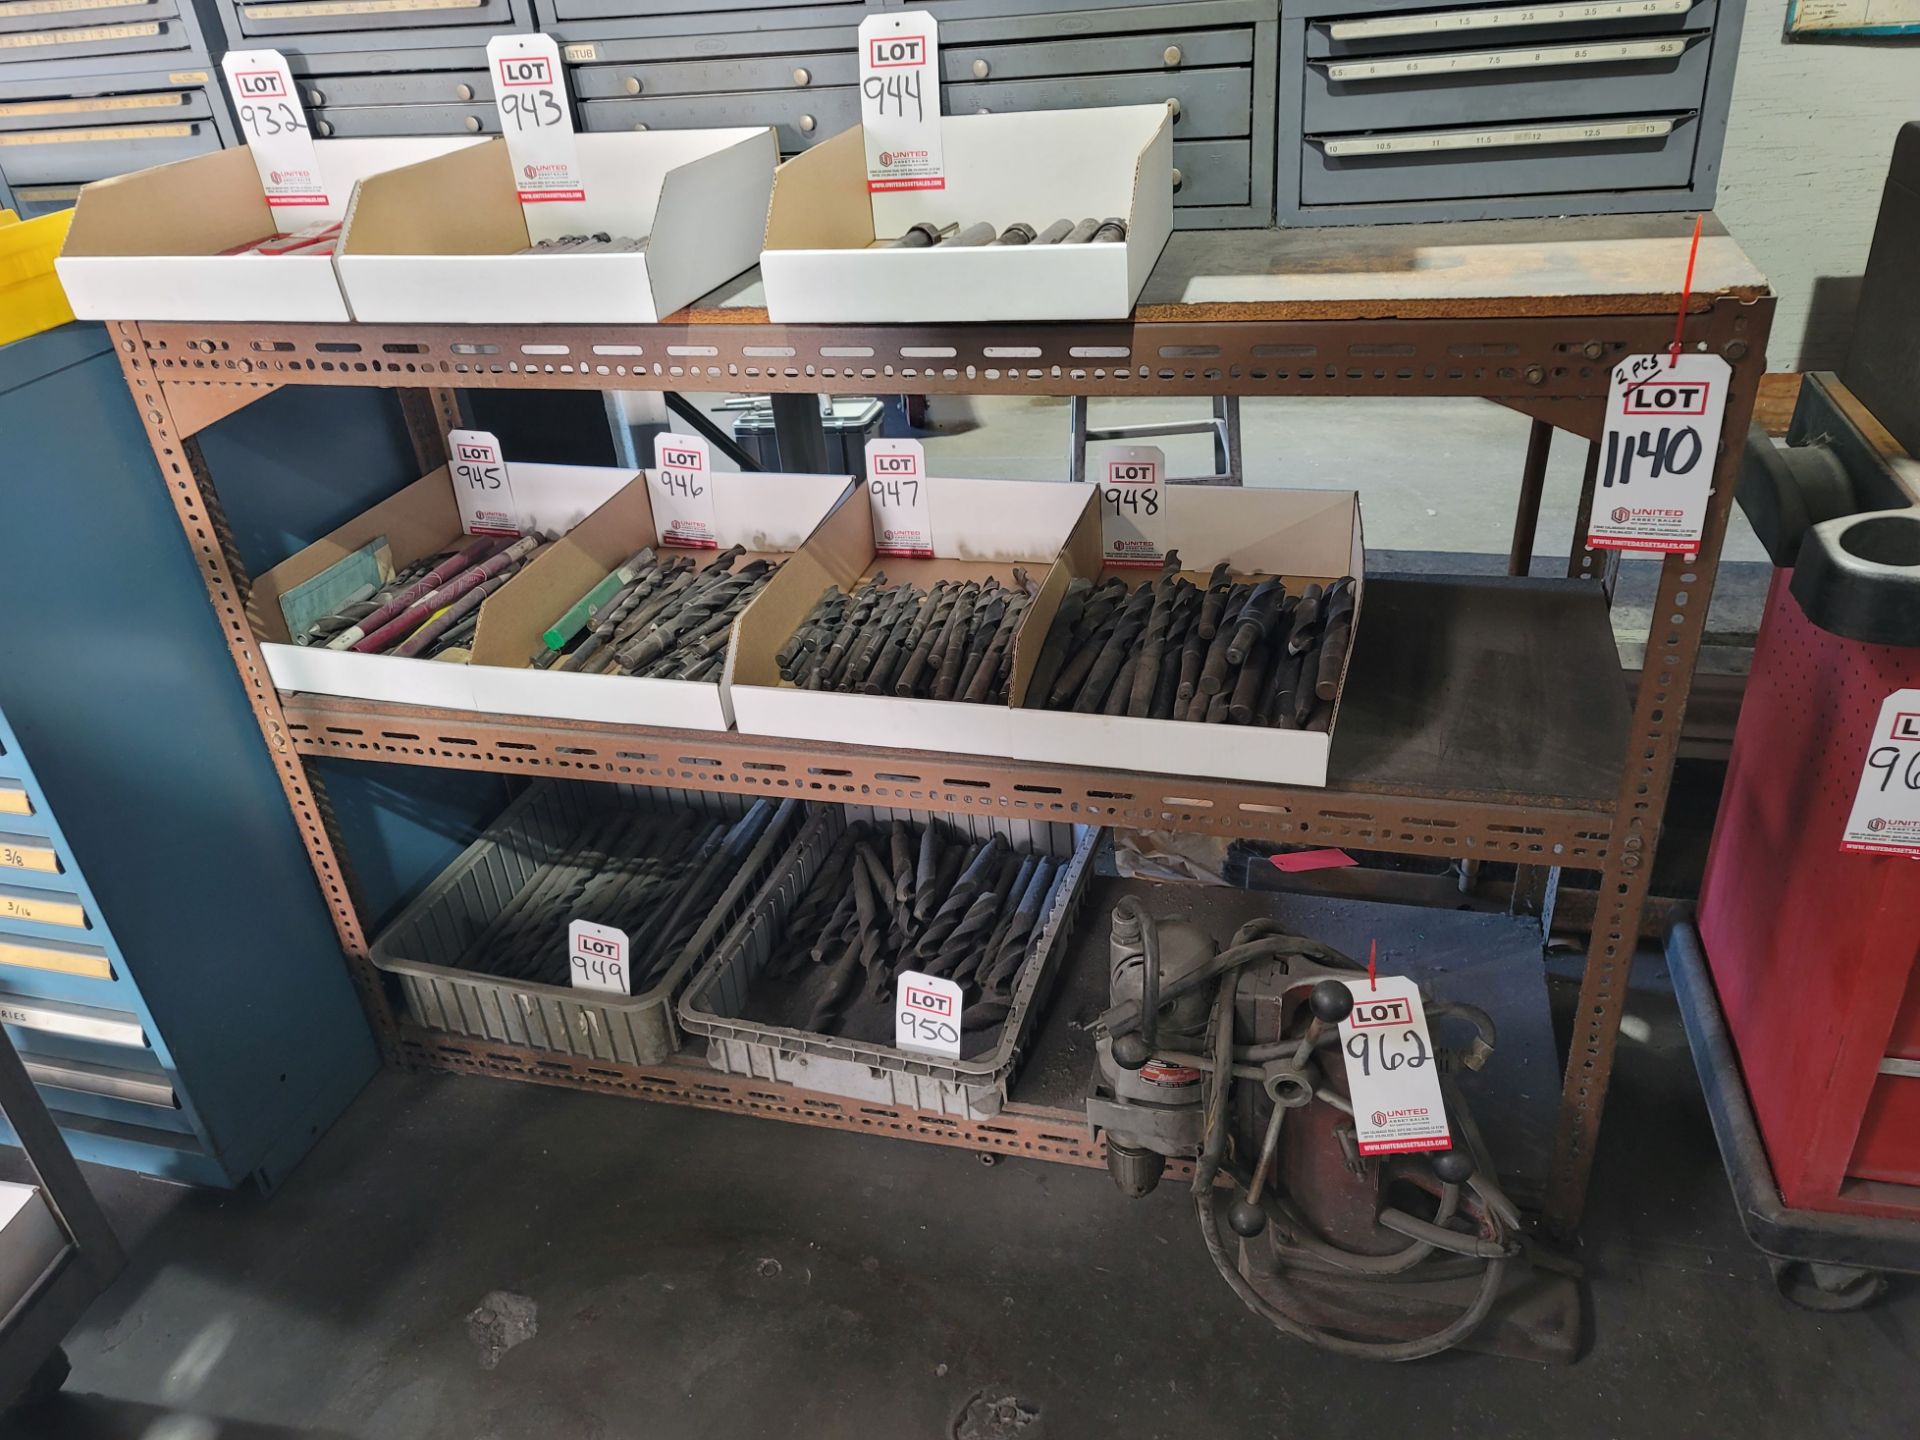 LOT - (2) SHELF UNITS: (1) 5' X 18" AND (1) 8' X 24", CONTENTS NOT INCLUDED, (THE 8' X 24" UNIT